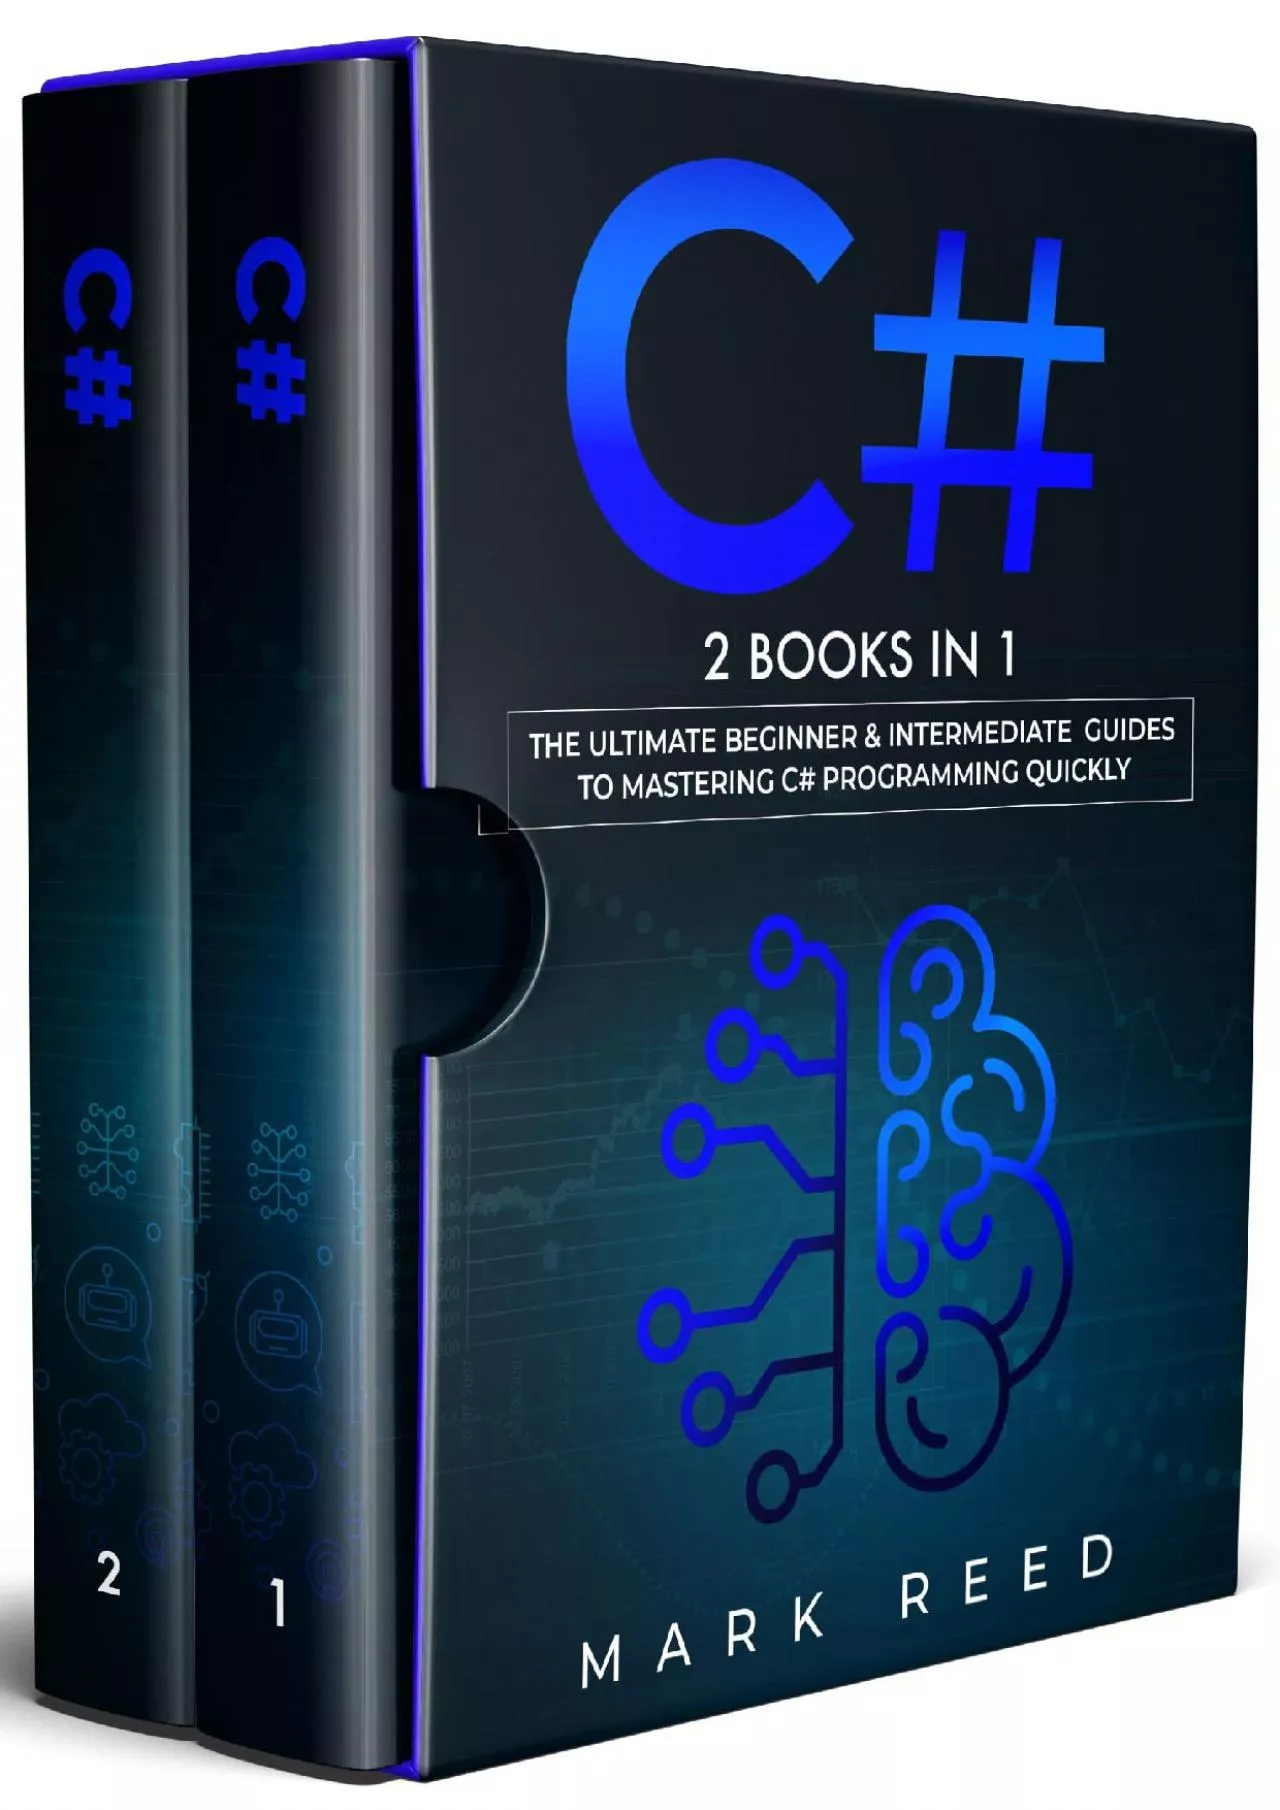 [READ]-C: 2 books in 1 - The Ultimate Beginner & Intermediate Guides to Mastering C Programming